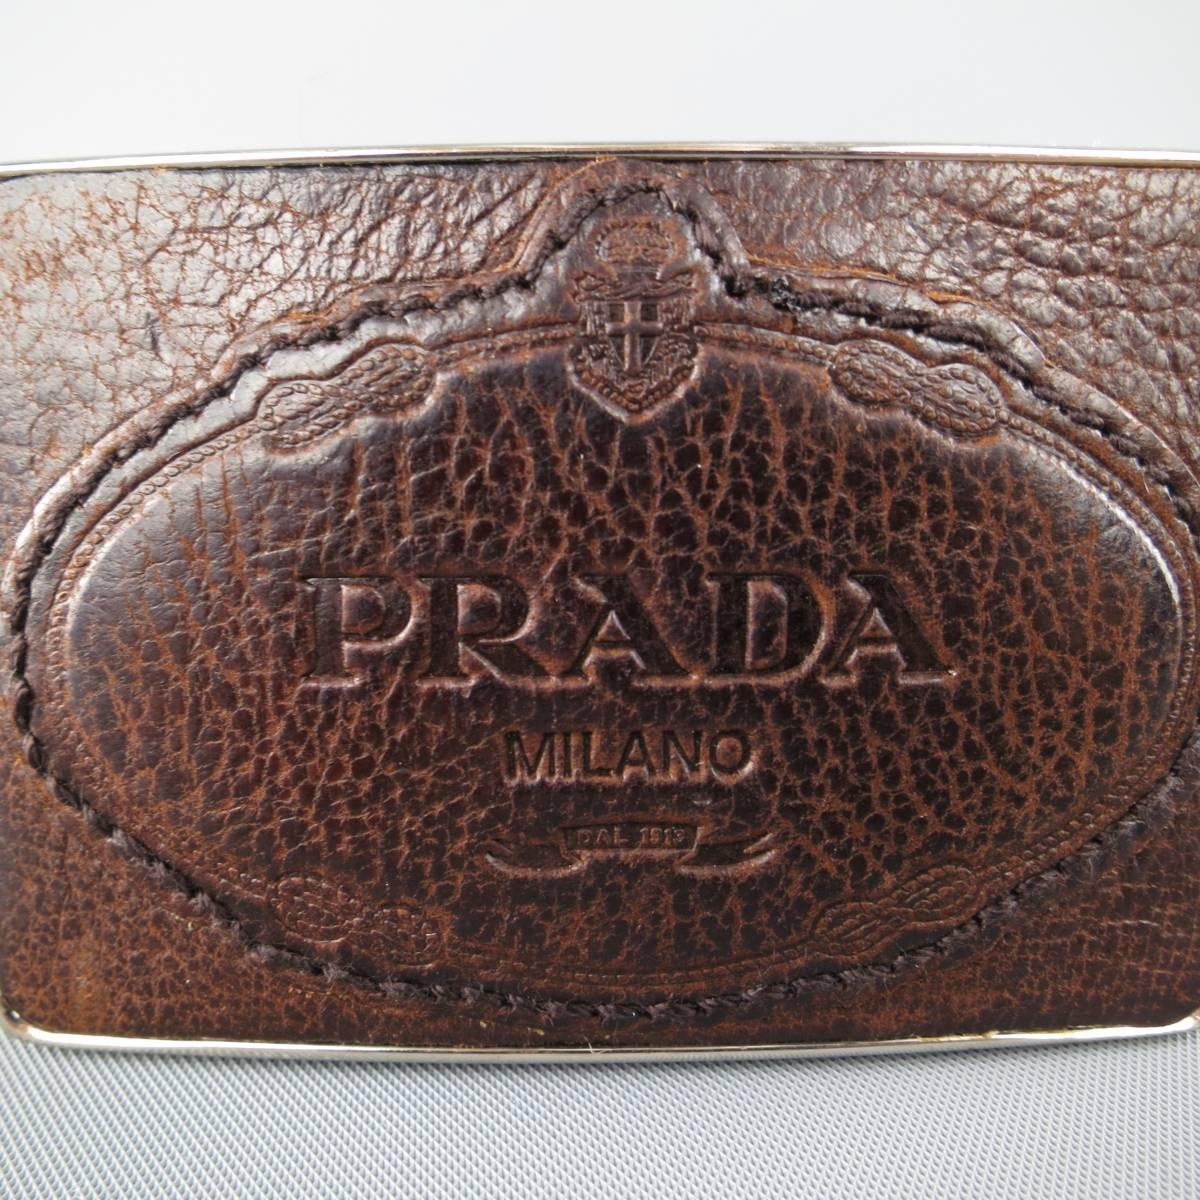 PRADA dress belt comes in a brown textured leather with a rectangular, logo embossed leather buckle on silver tone metal base. Minor wear. Made in Italy.
 
Good Pre-Owned Condition.
Marked: 95/38
 
Length: 42 in.
Width: 1.25 in.
Fits: 35-39